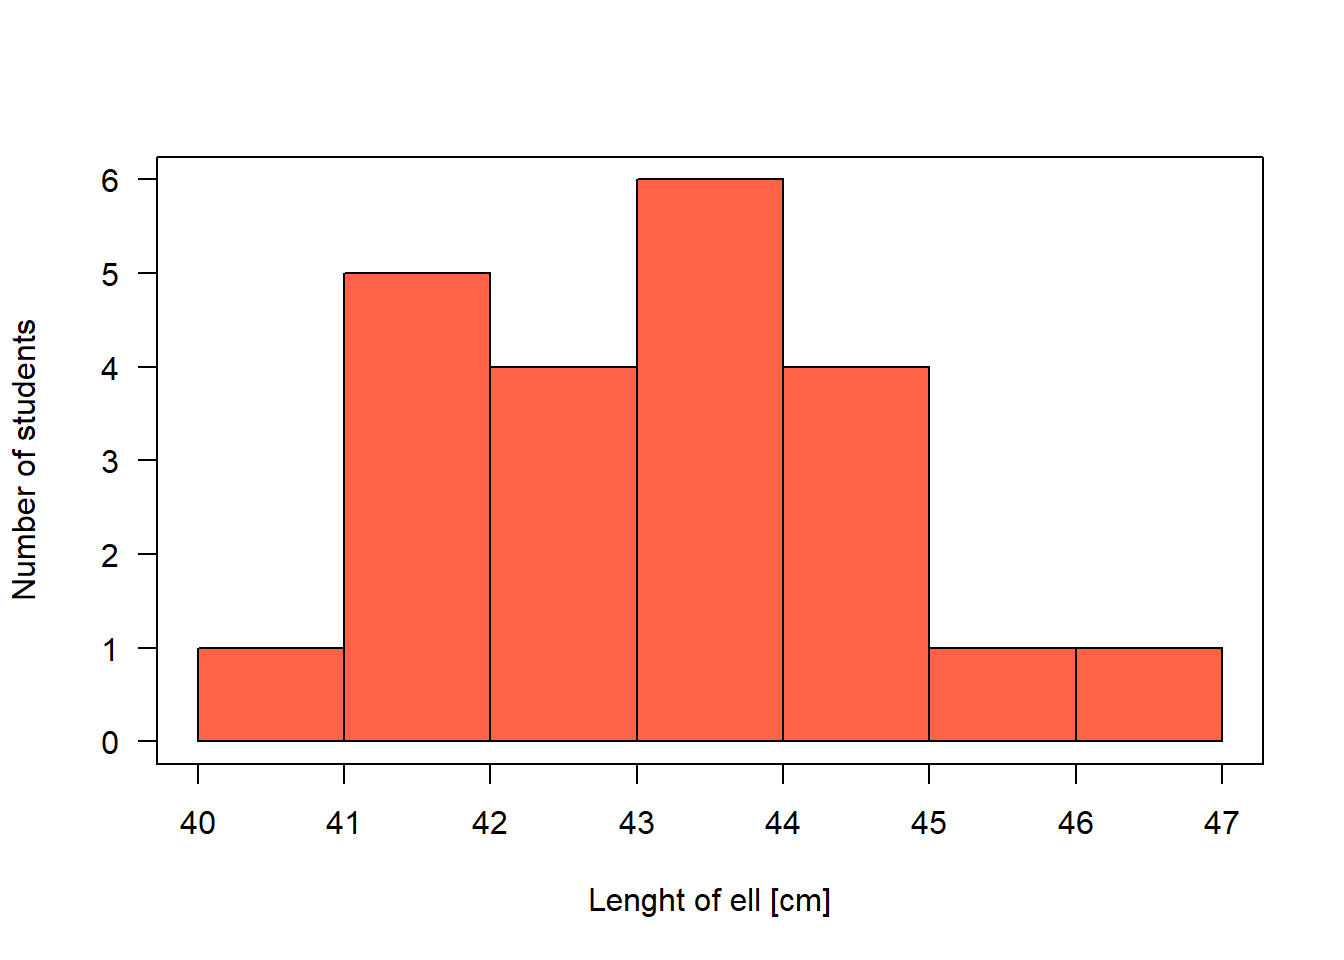 Histogram of the length of ell of statistics course participants.